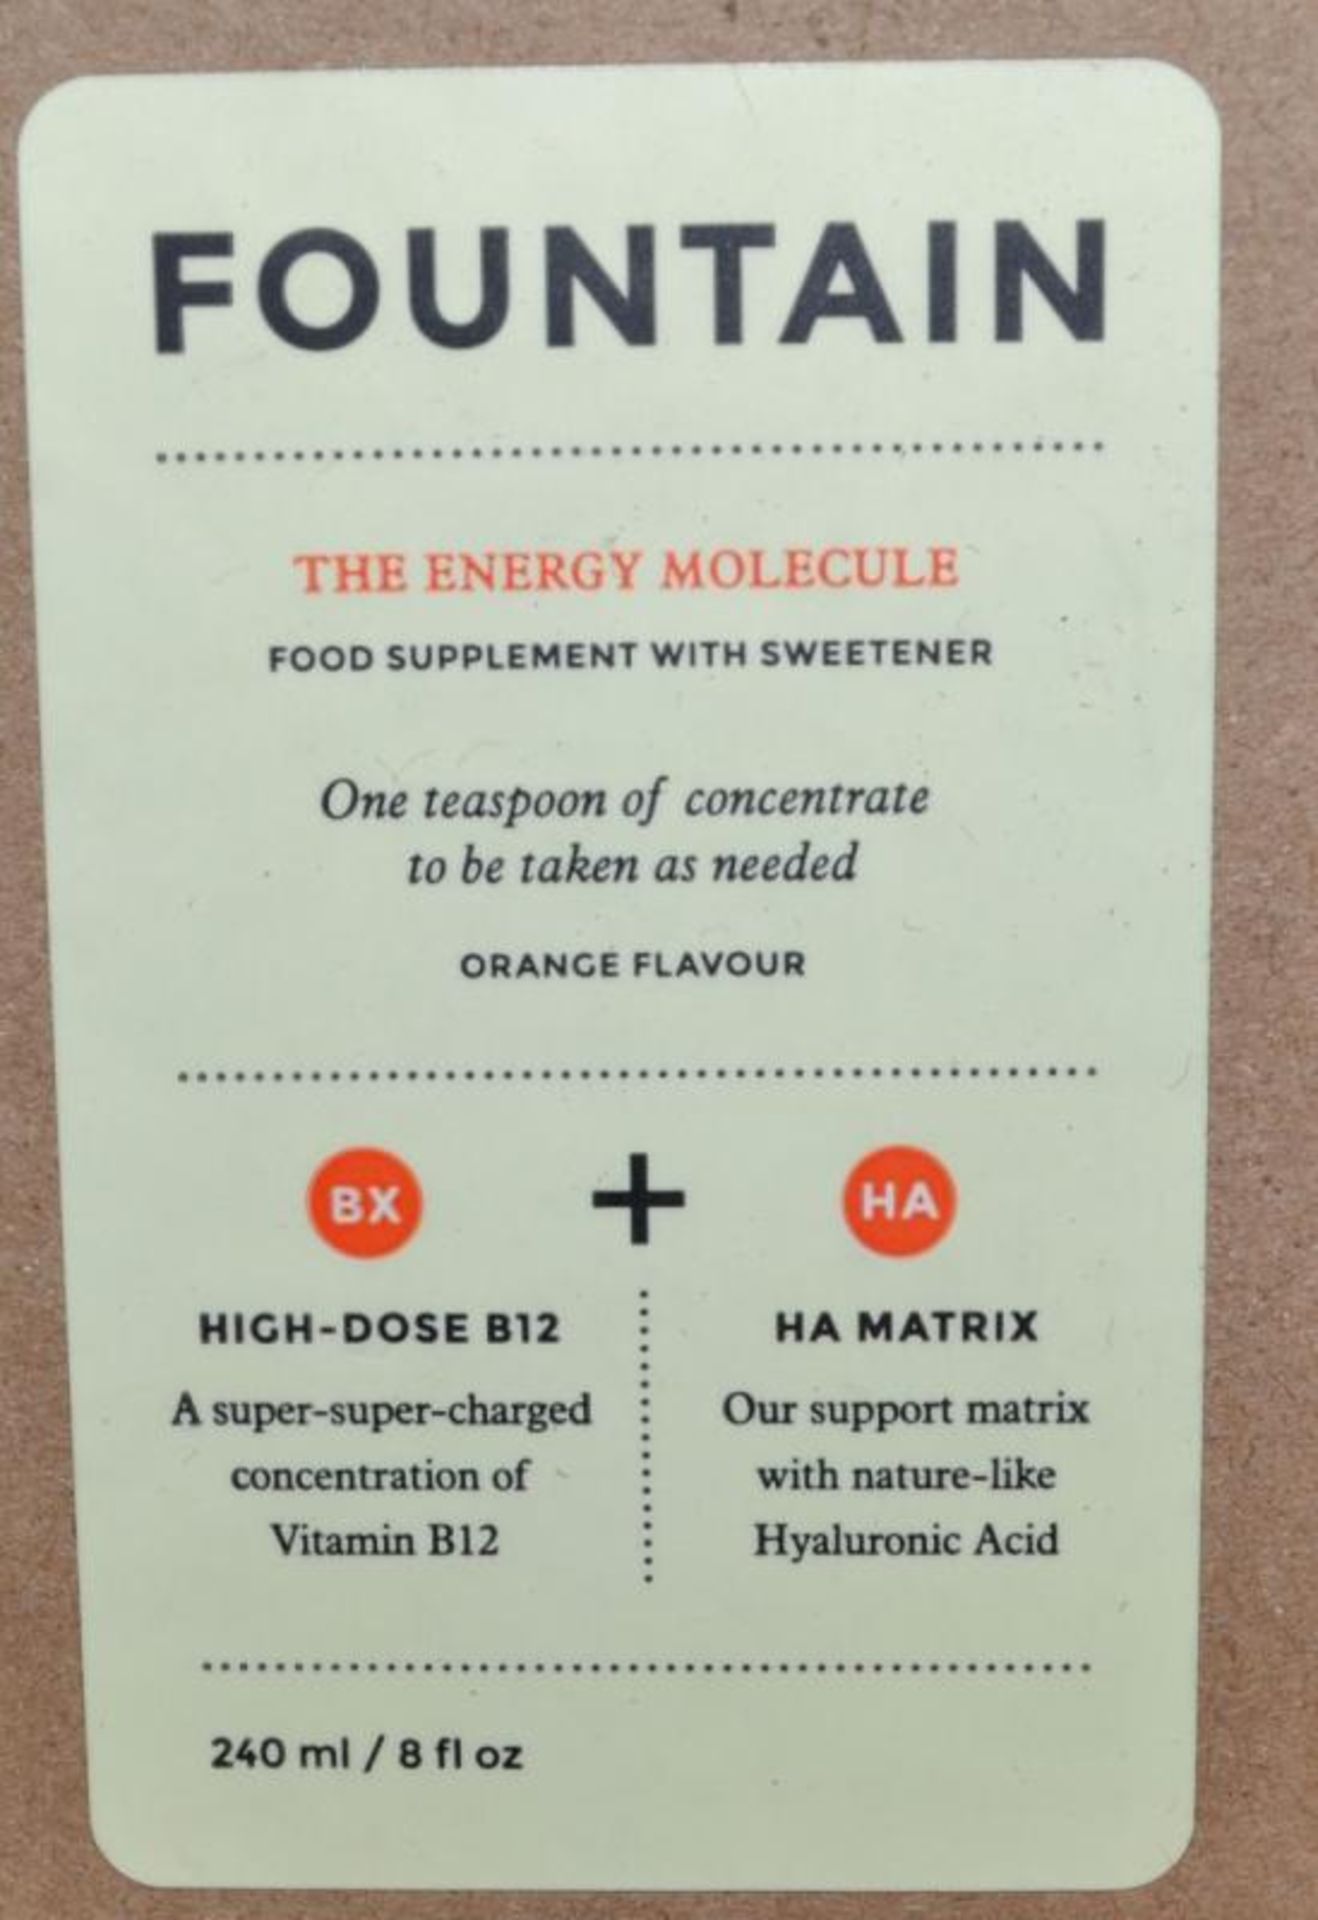 20 x 240ml Bottles of Fountain, The Energy Molecule Supplement - New & Boxed - CL185 - Ref: DRT0643 - Image 6 of 7